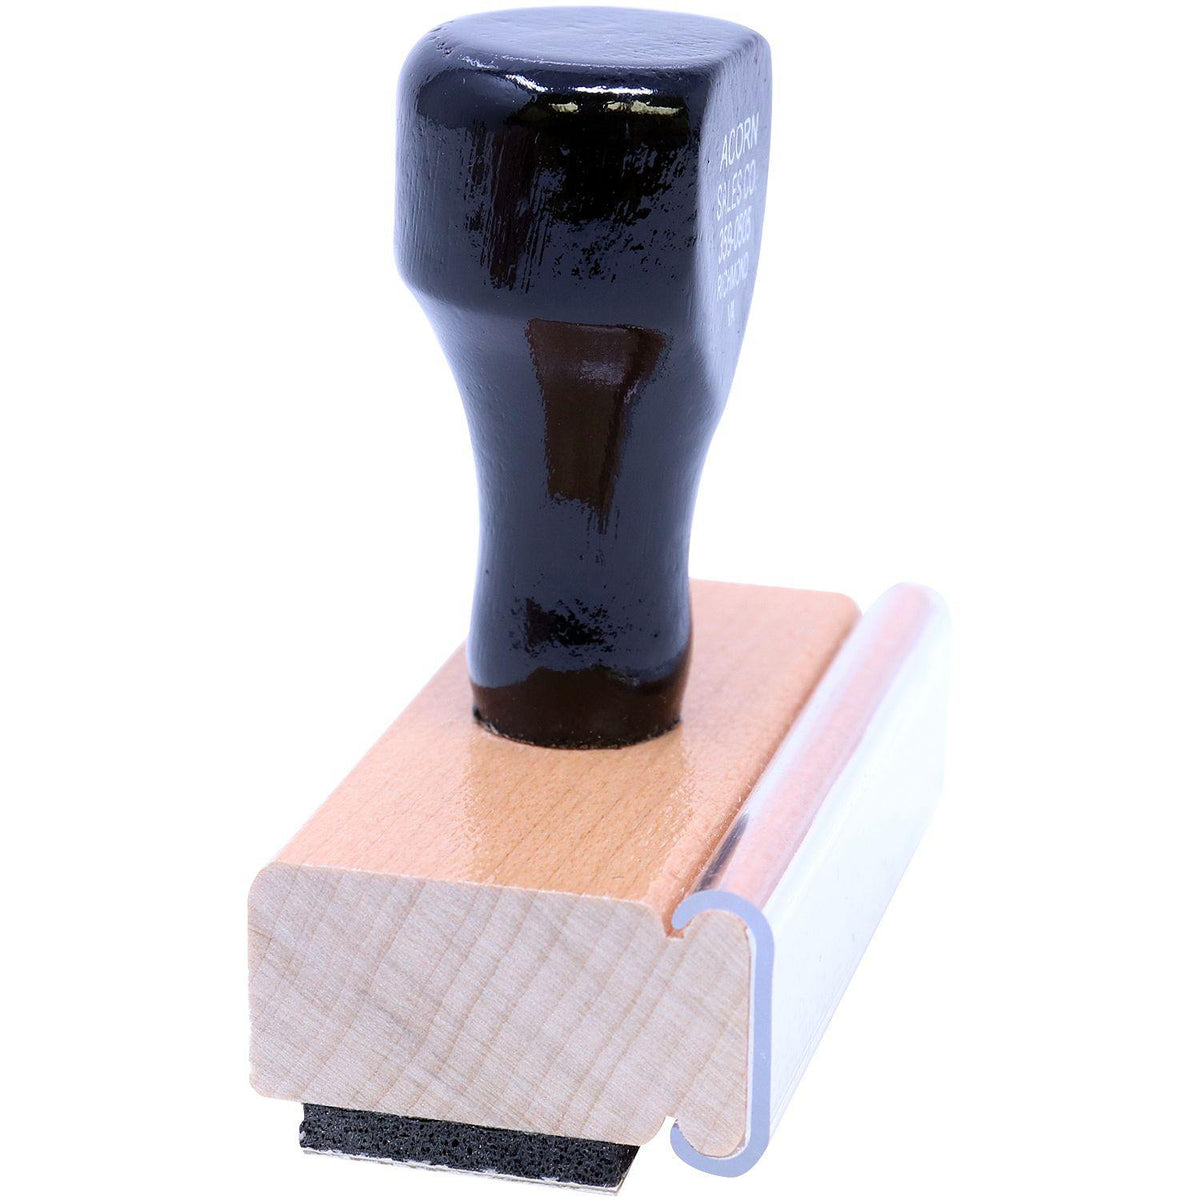 Side View of Wealth Management Rubber Stamp at an Angle